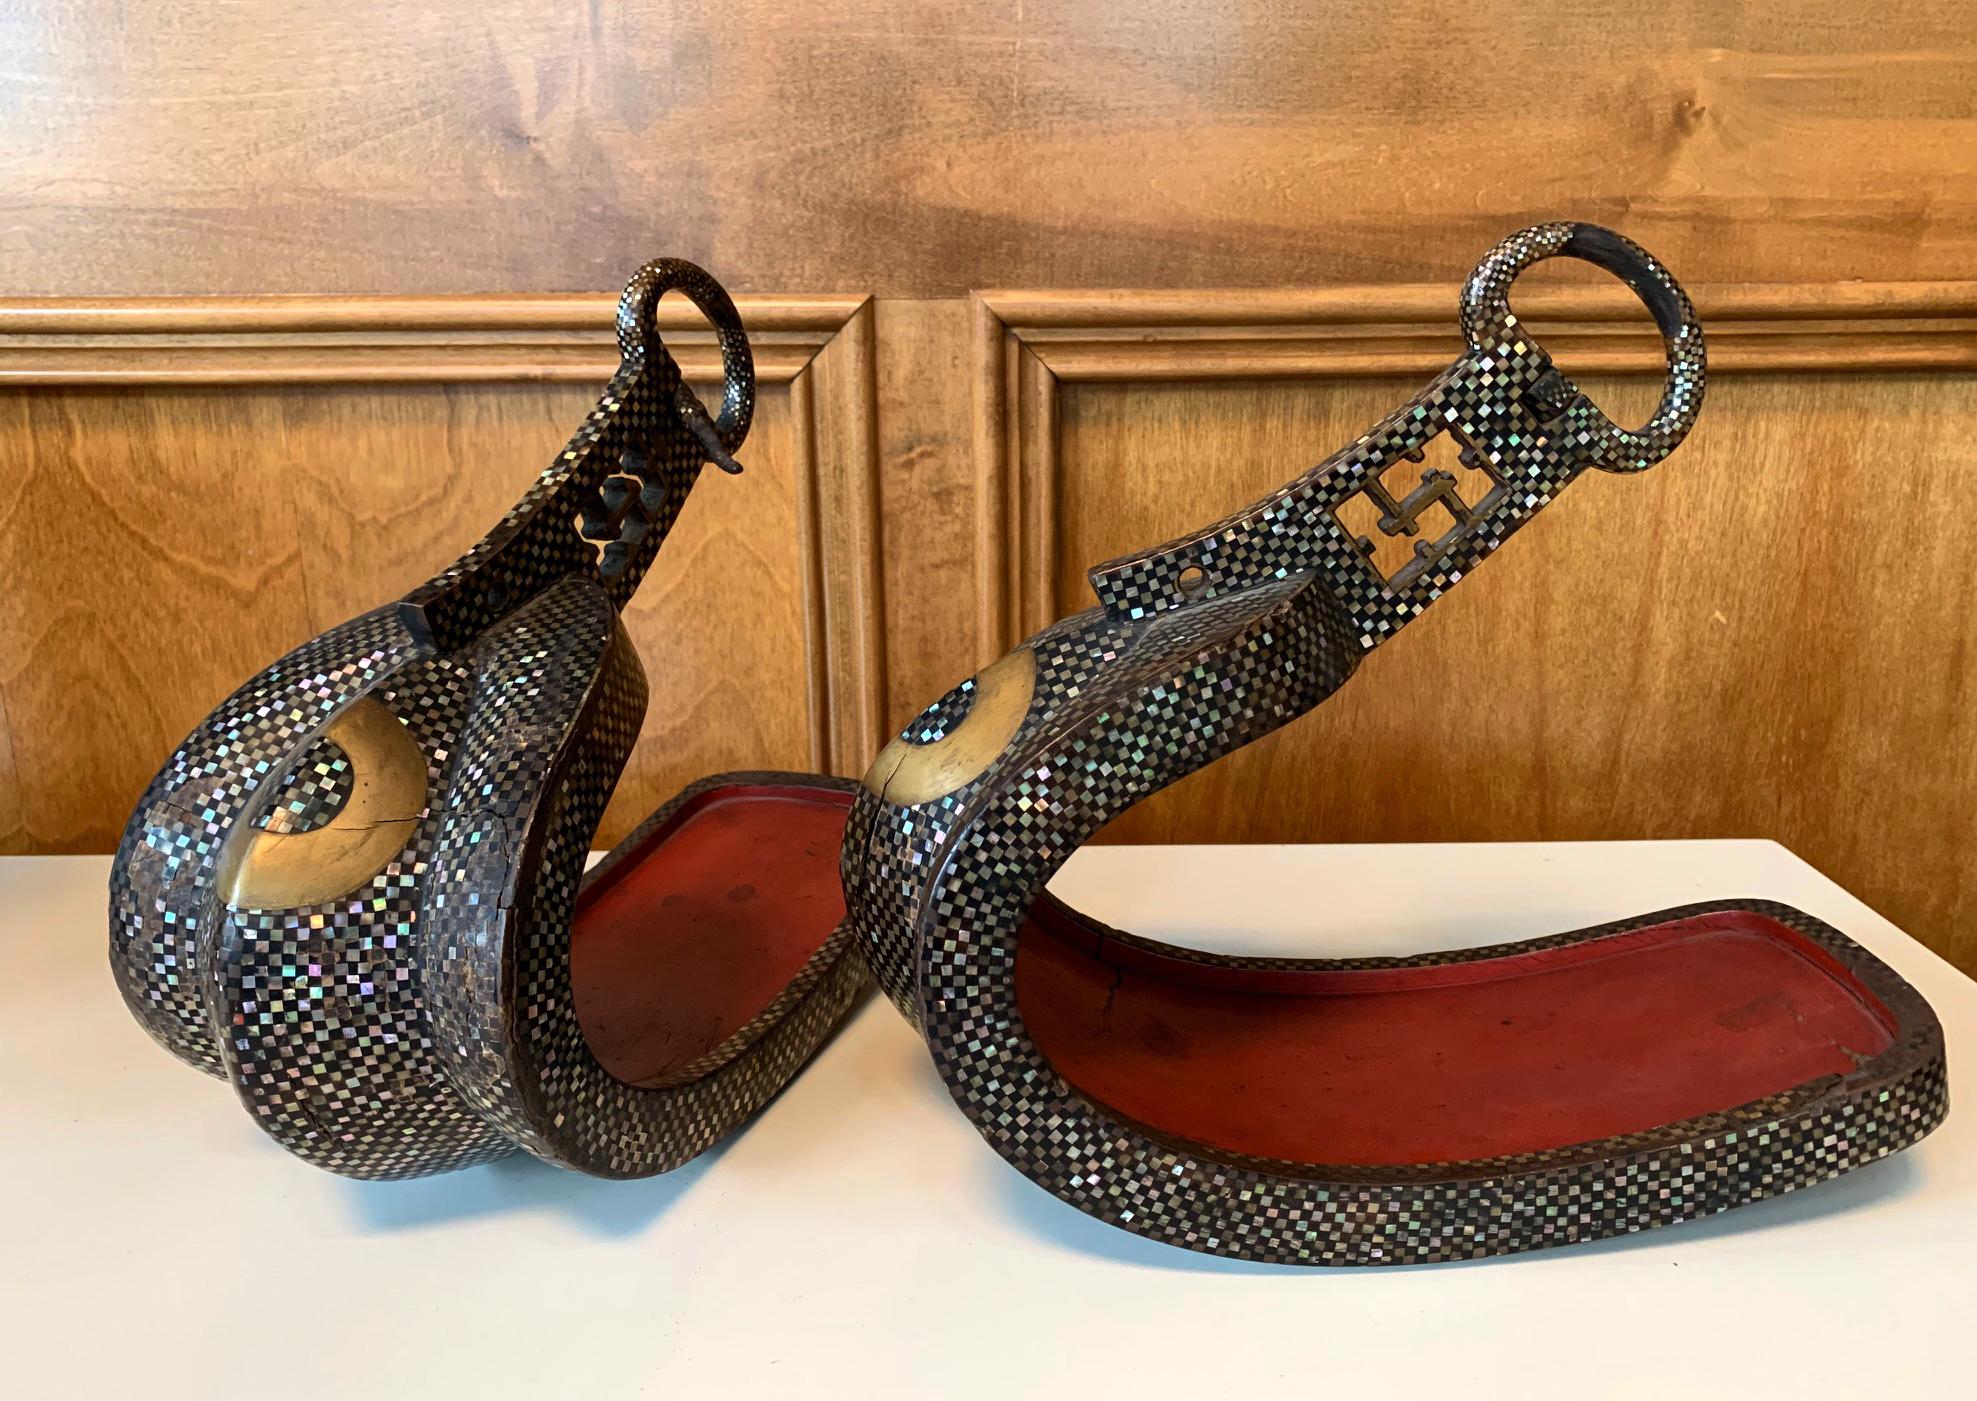 A pair of antique Japanese abumi, horse-riding stirrups for nobles or samurais, in cast iron of Nanban style with Agai (abalone shell) inlay, circa Momoyama to Edo period (16th-17th century) . The prototype of Japanese abumi of this 